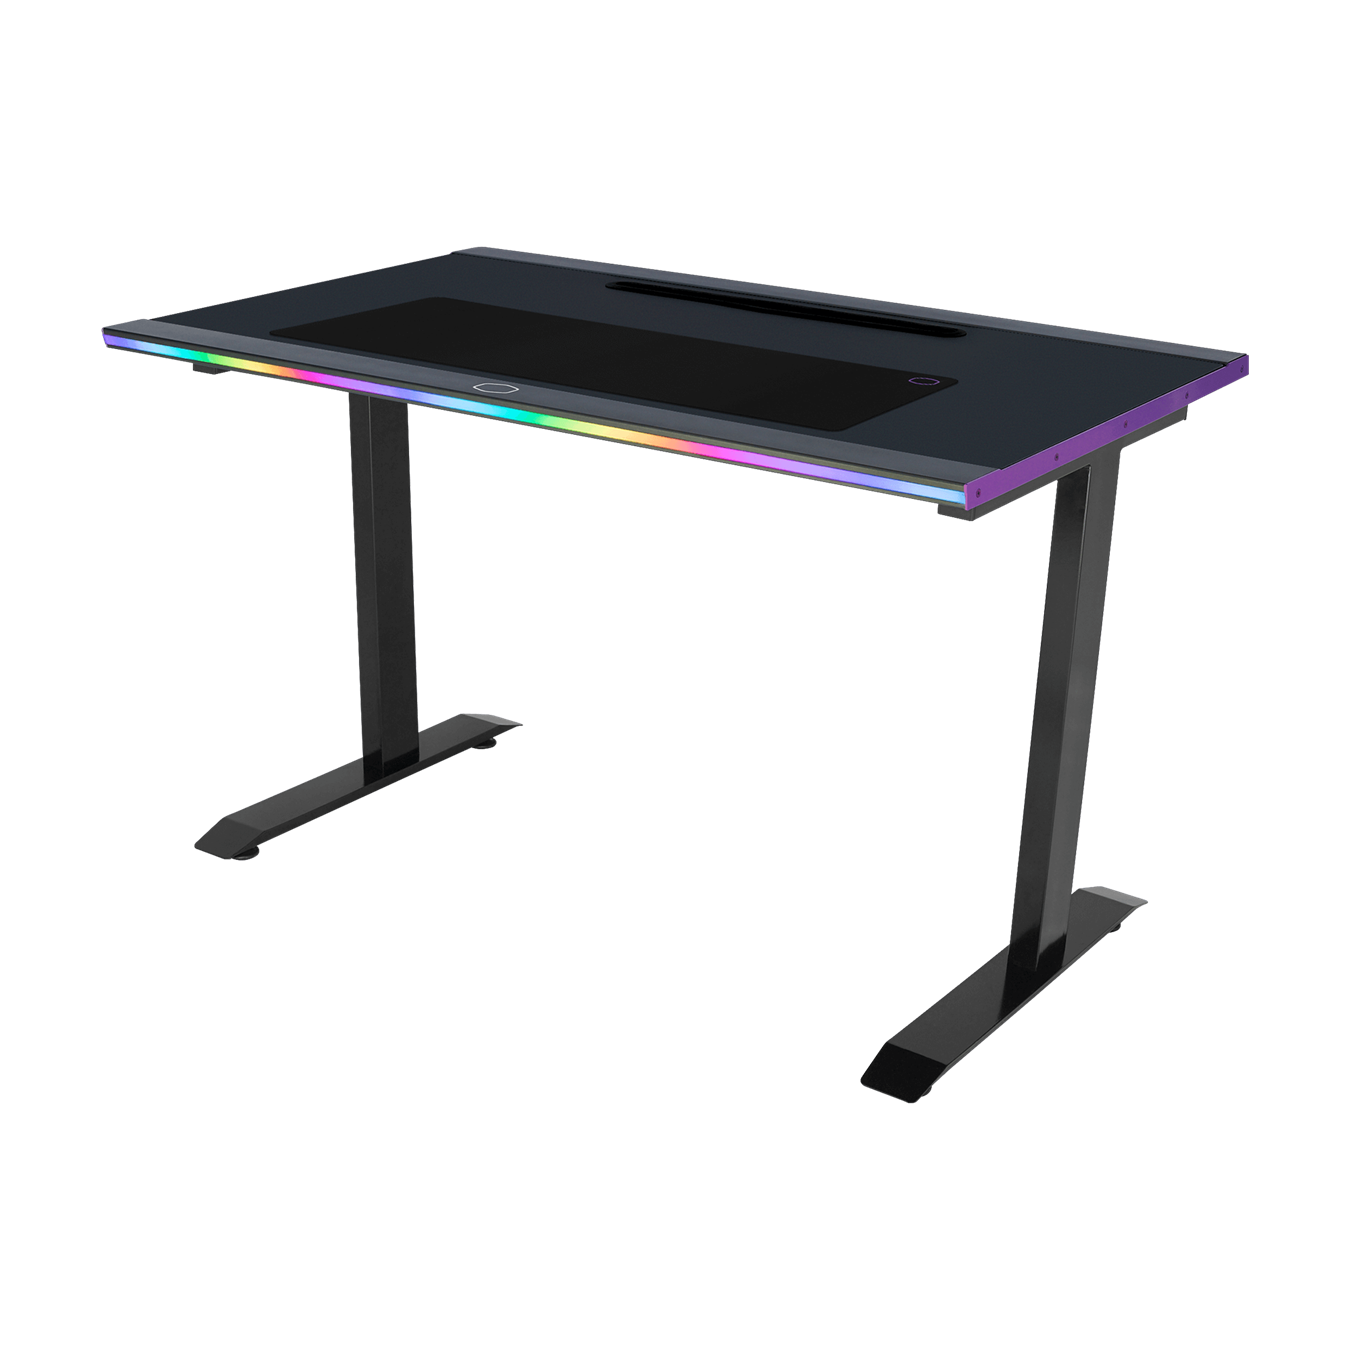 GD120 ARGB Gaming Desk - 45 degree angle of right tilt front view with RGB LED lights